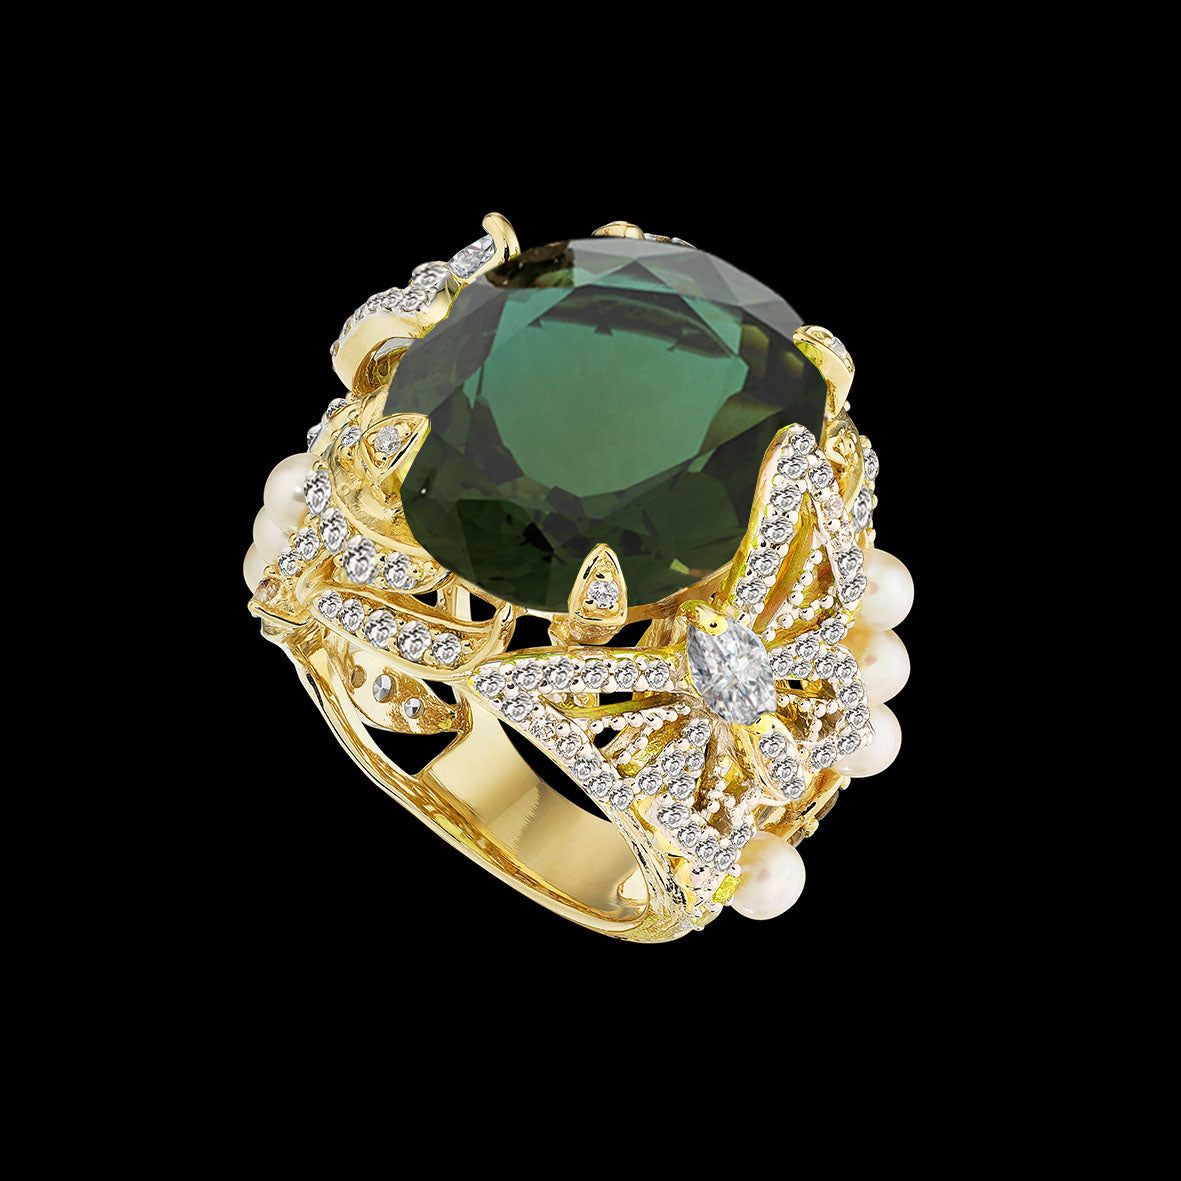 Green Tourmaline Swallowtail Ring, Ring, Anabela Chan Joaillerie - Fine jewelry with laboratory grown and created gemstones hand-crafted in the United Kingdom. Anabela Chan Joaillerie is the first fine jewellery brand in the world to champion laboratory-grown and created gemstones with high jewellery design, artisanal craftsmanship and a focus on ethical and sustainable innovations.